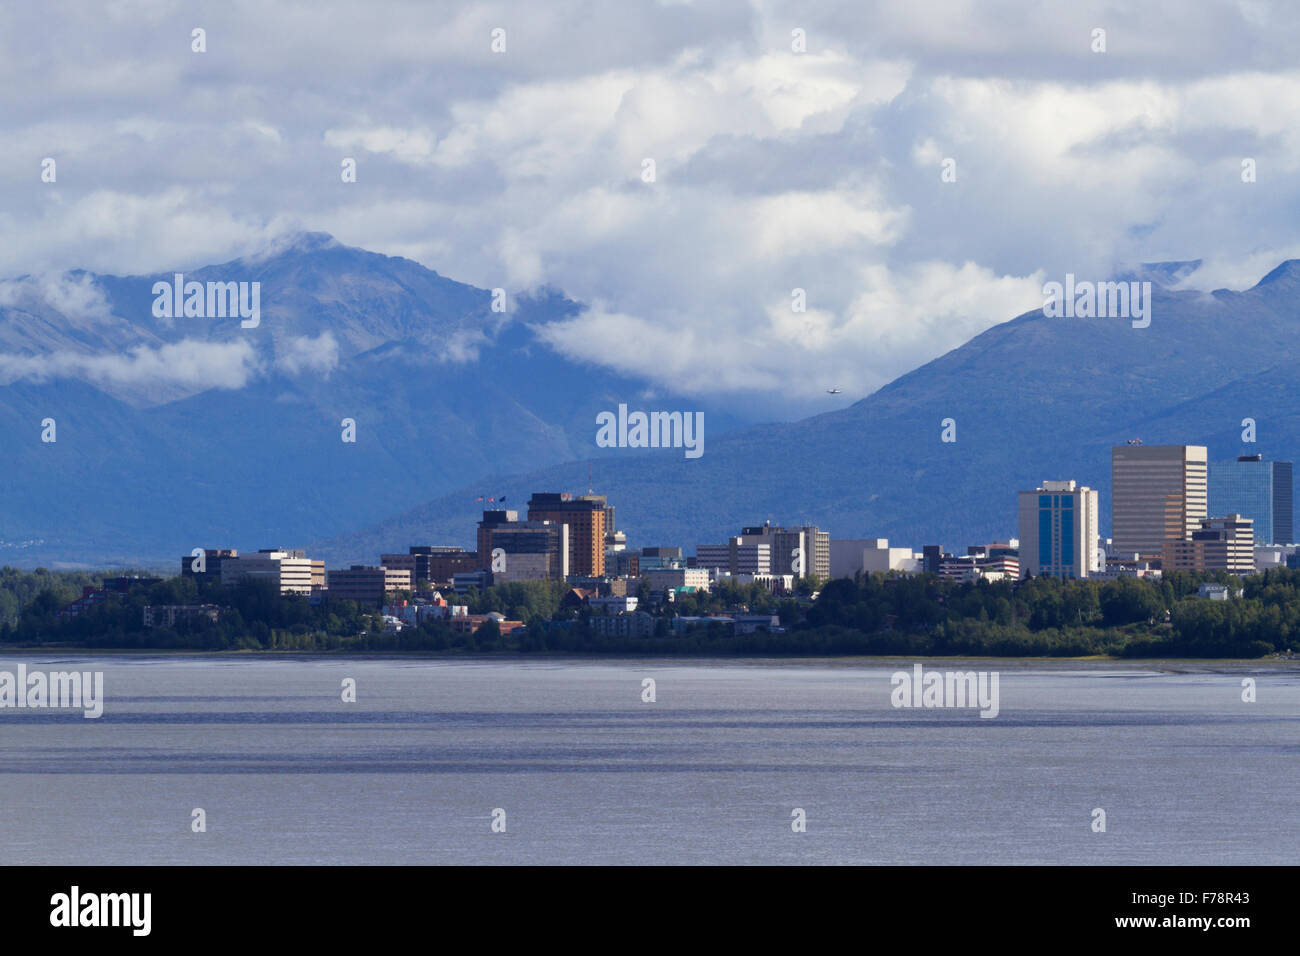 Beautiful view of Anchorage skyline across Cook Inlet with rugged Chugach Mountains behind.  Building signs and logos removed. Stock Photo